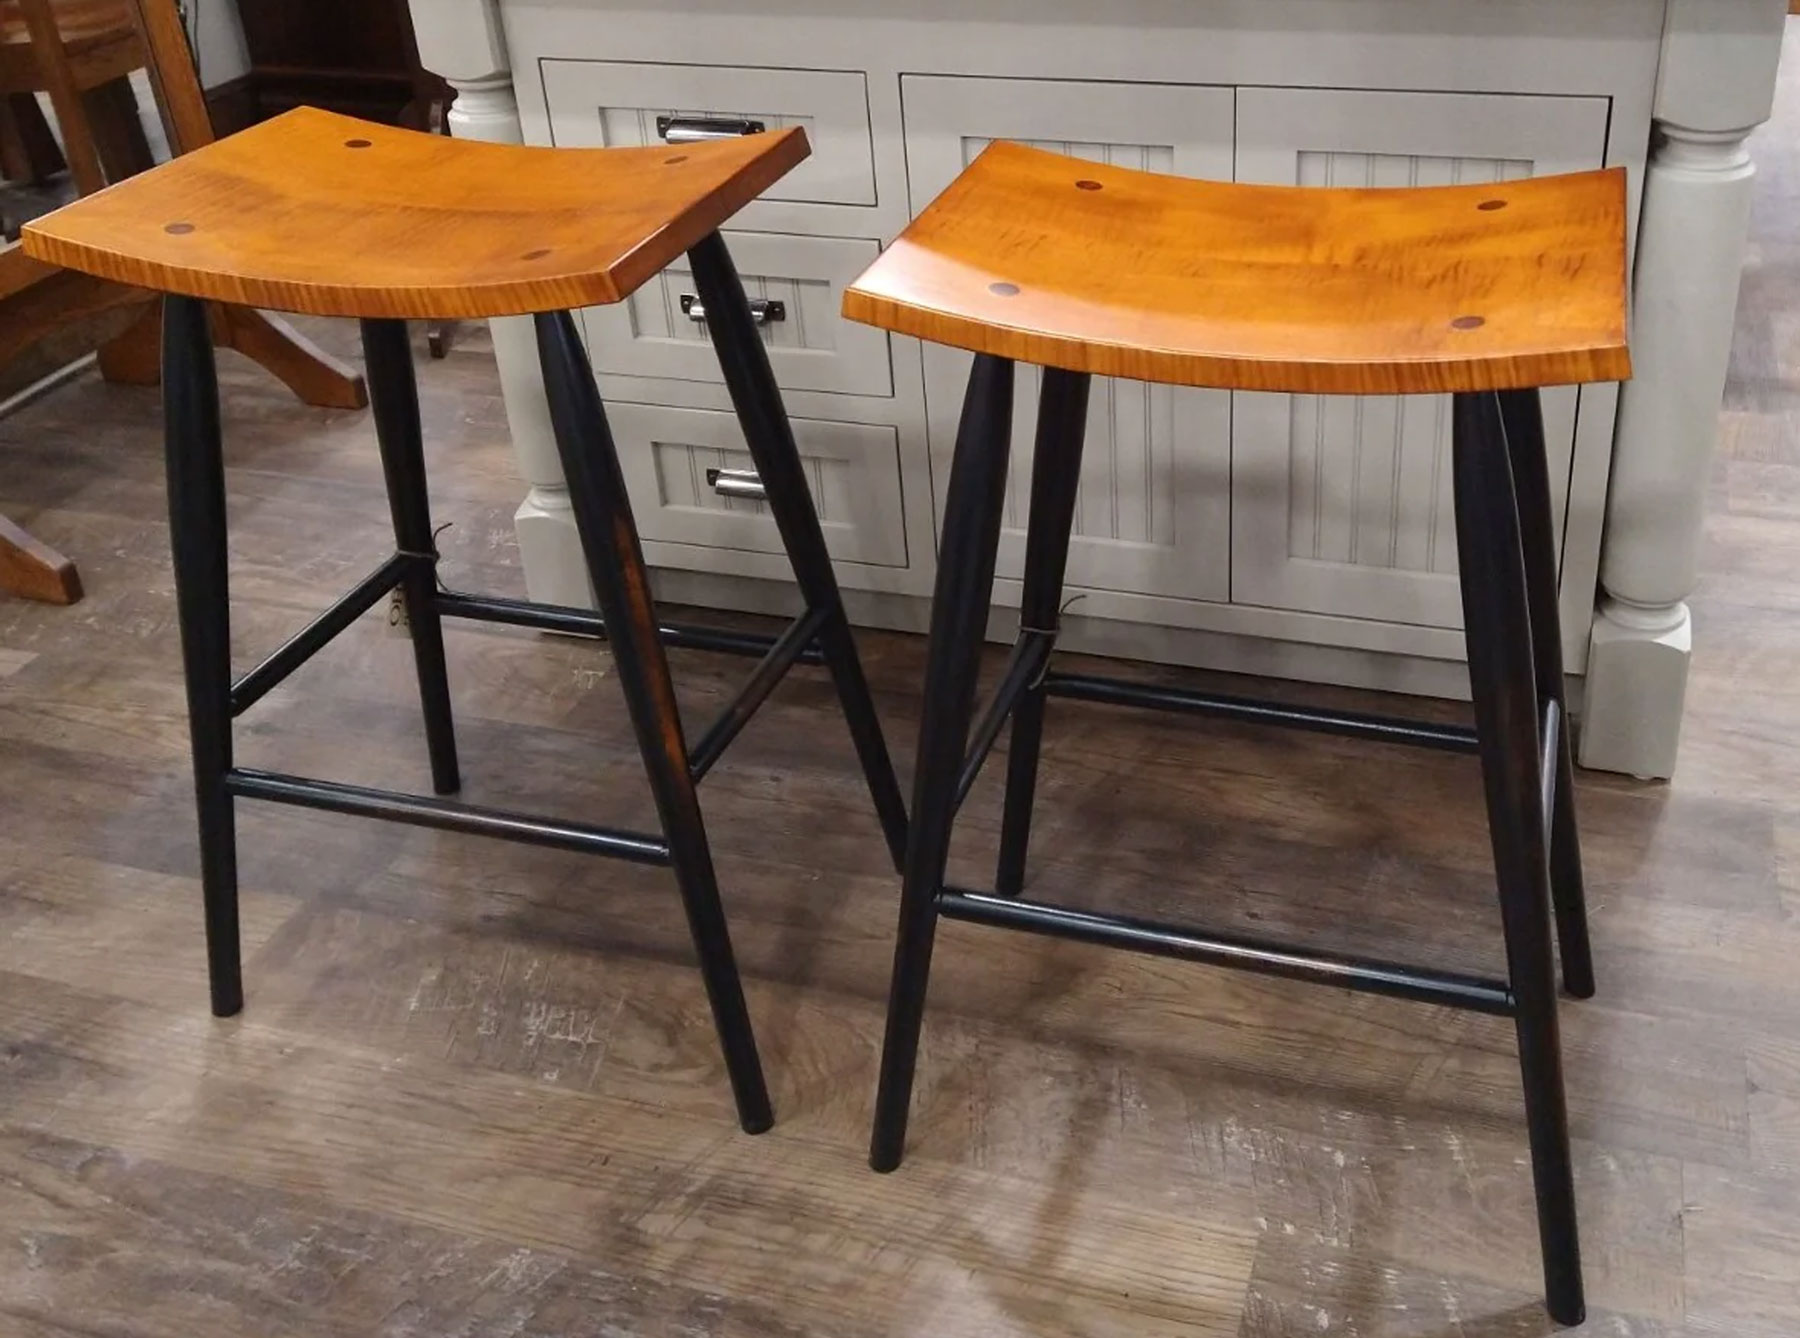 (2) Treharn Crescent Bar Stools with Tiger Maple Seat